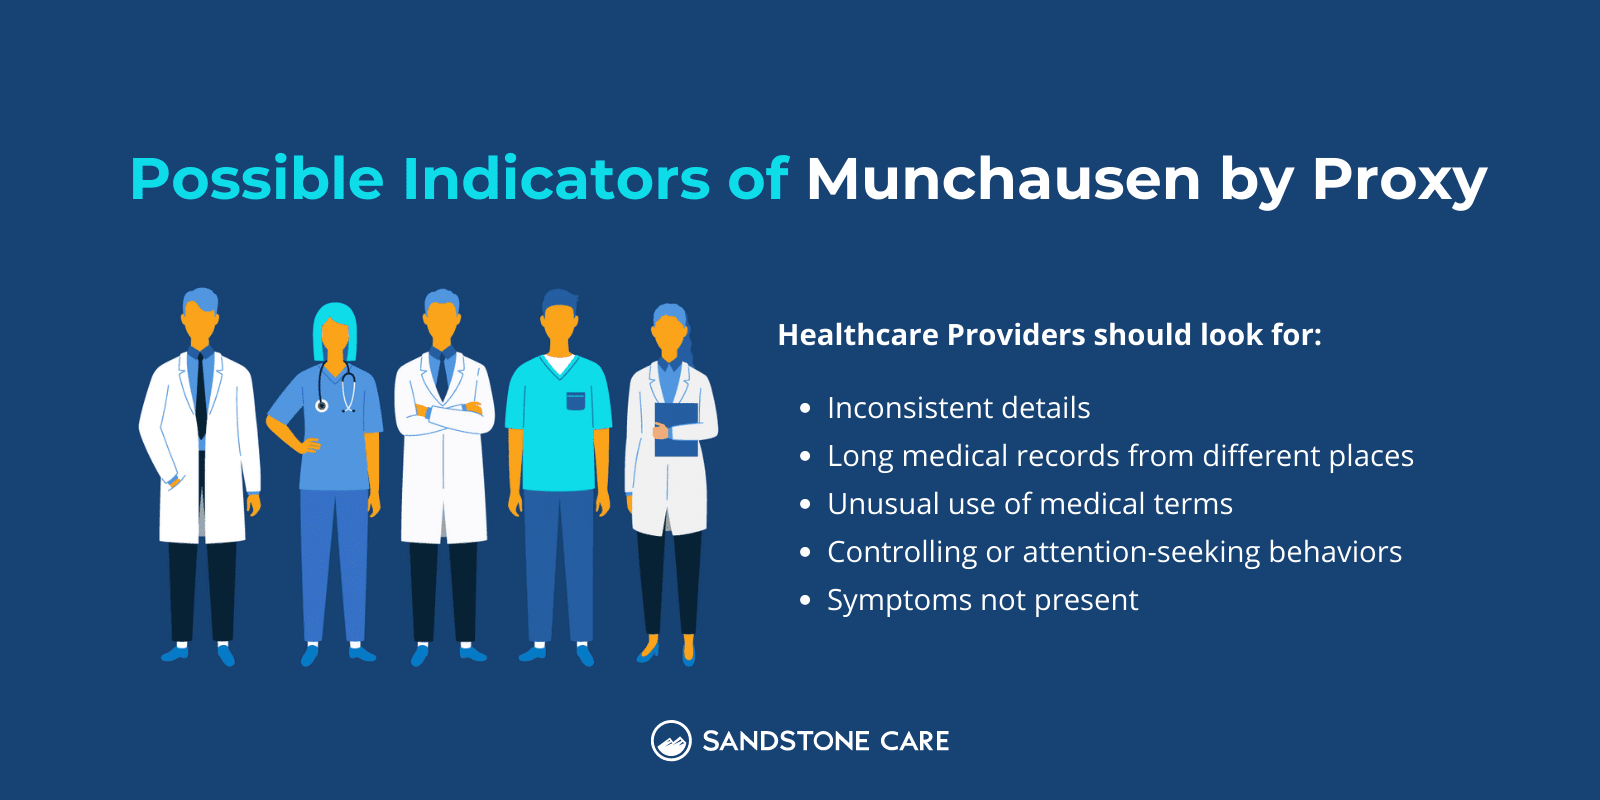 "Possible Indicators Of Munchausen By Proxy" written above an illustration of healthcare providers and a list of indicators that healthcare providers should look for.